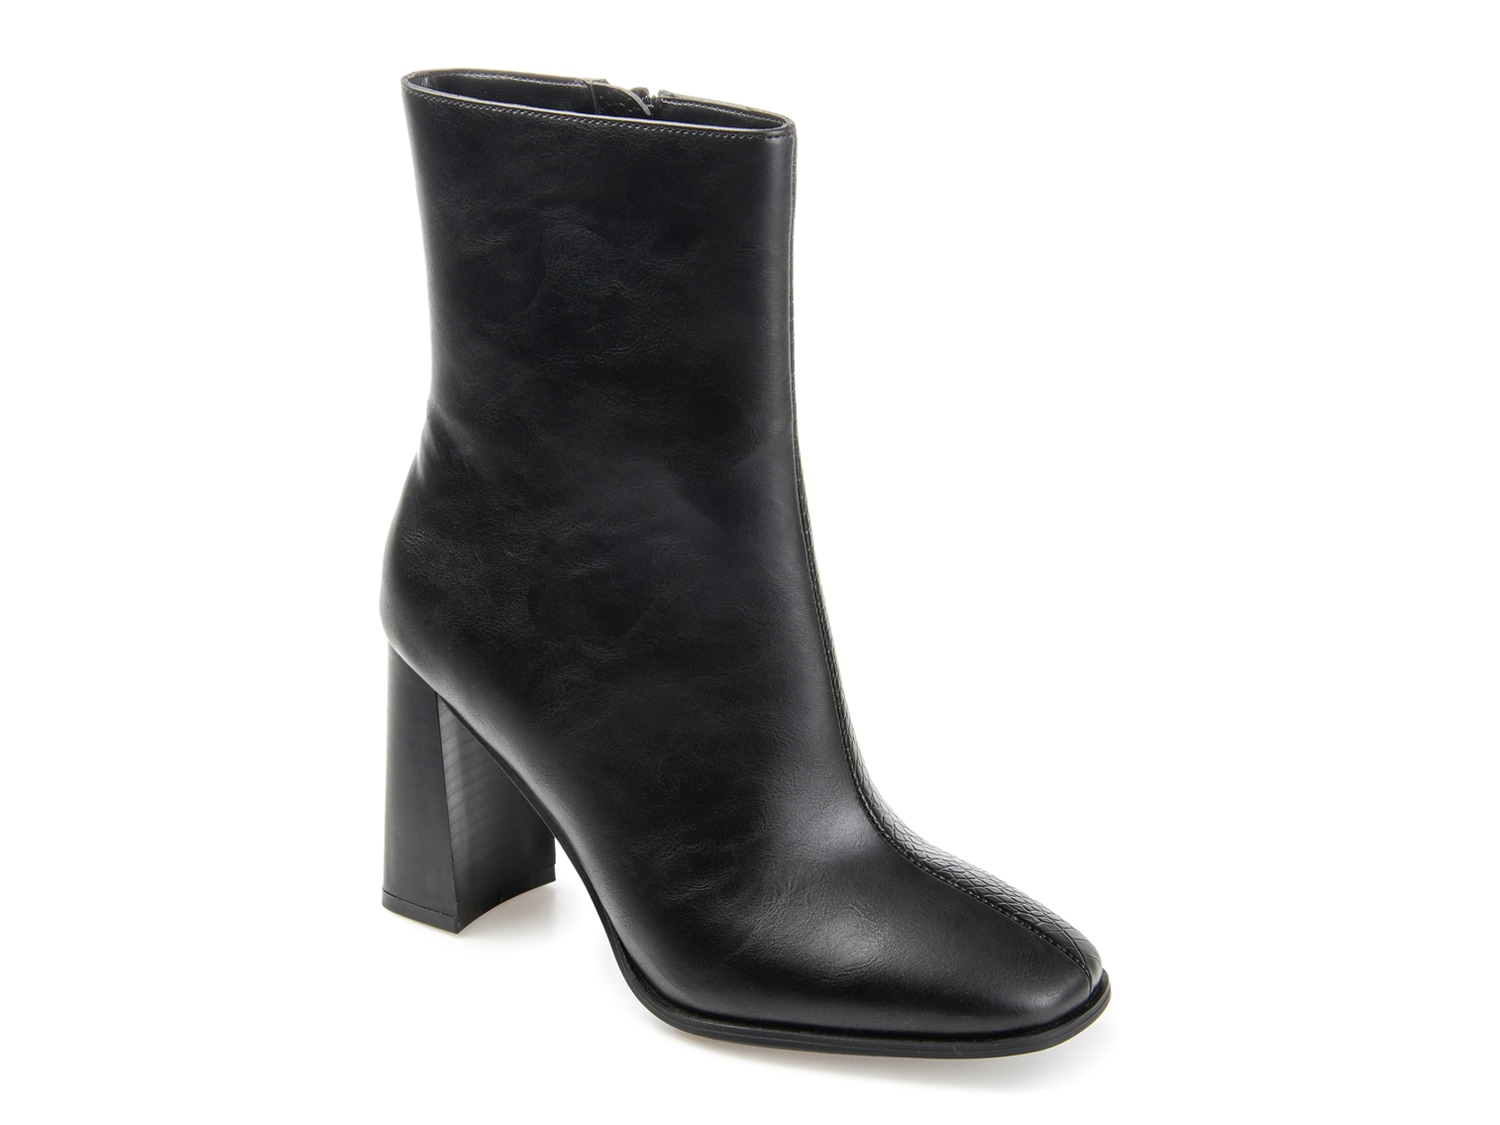 Journee Collection January Bootie - Free Shipping | DSW